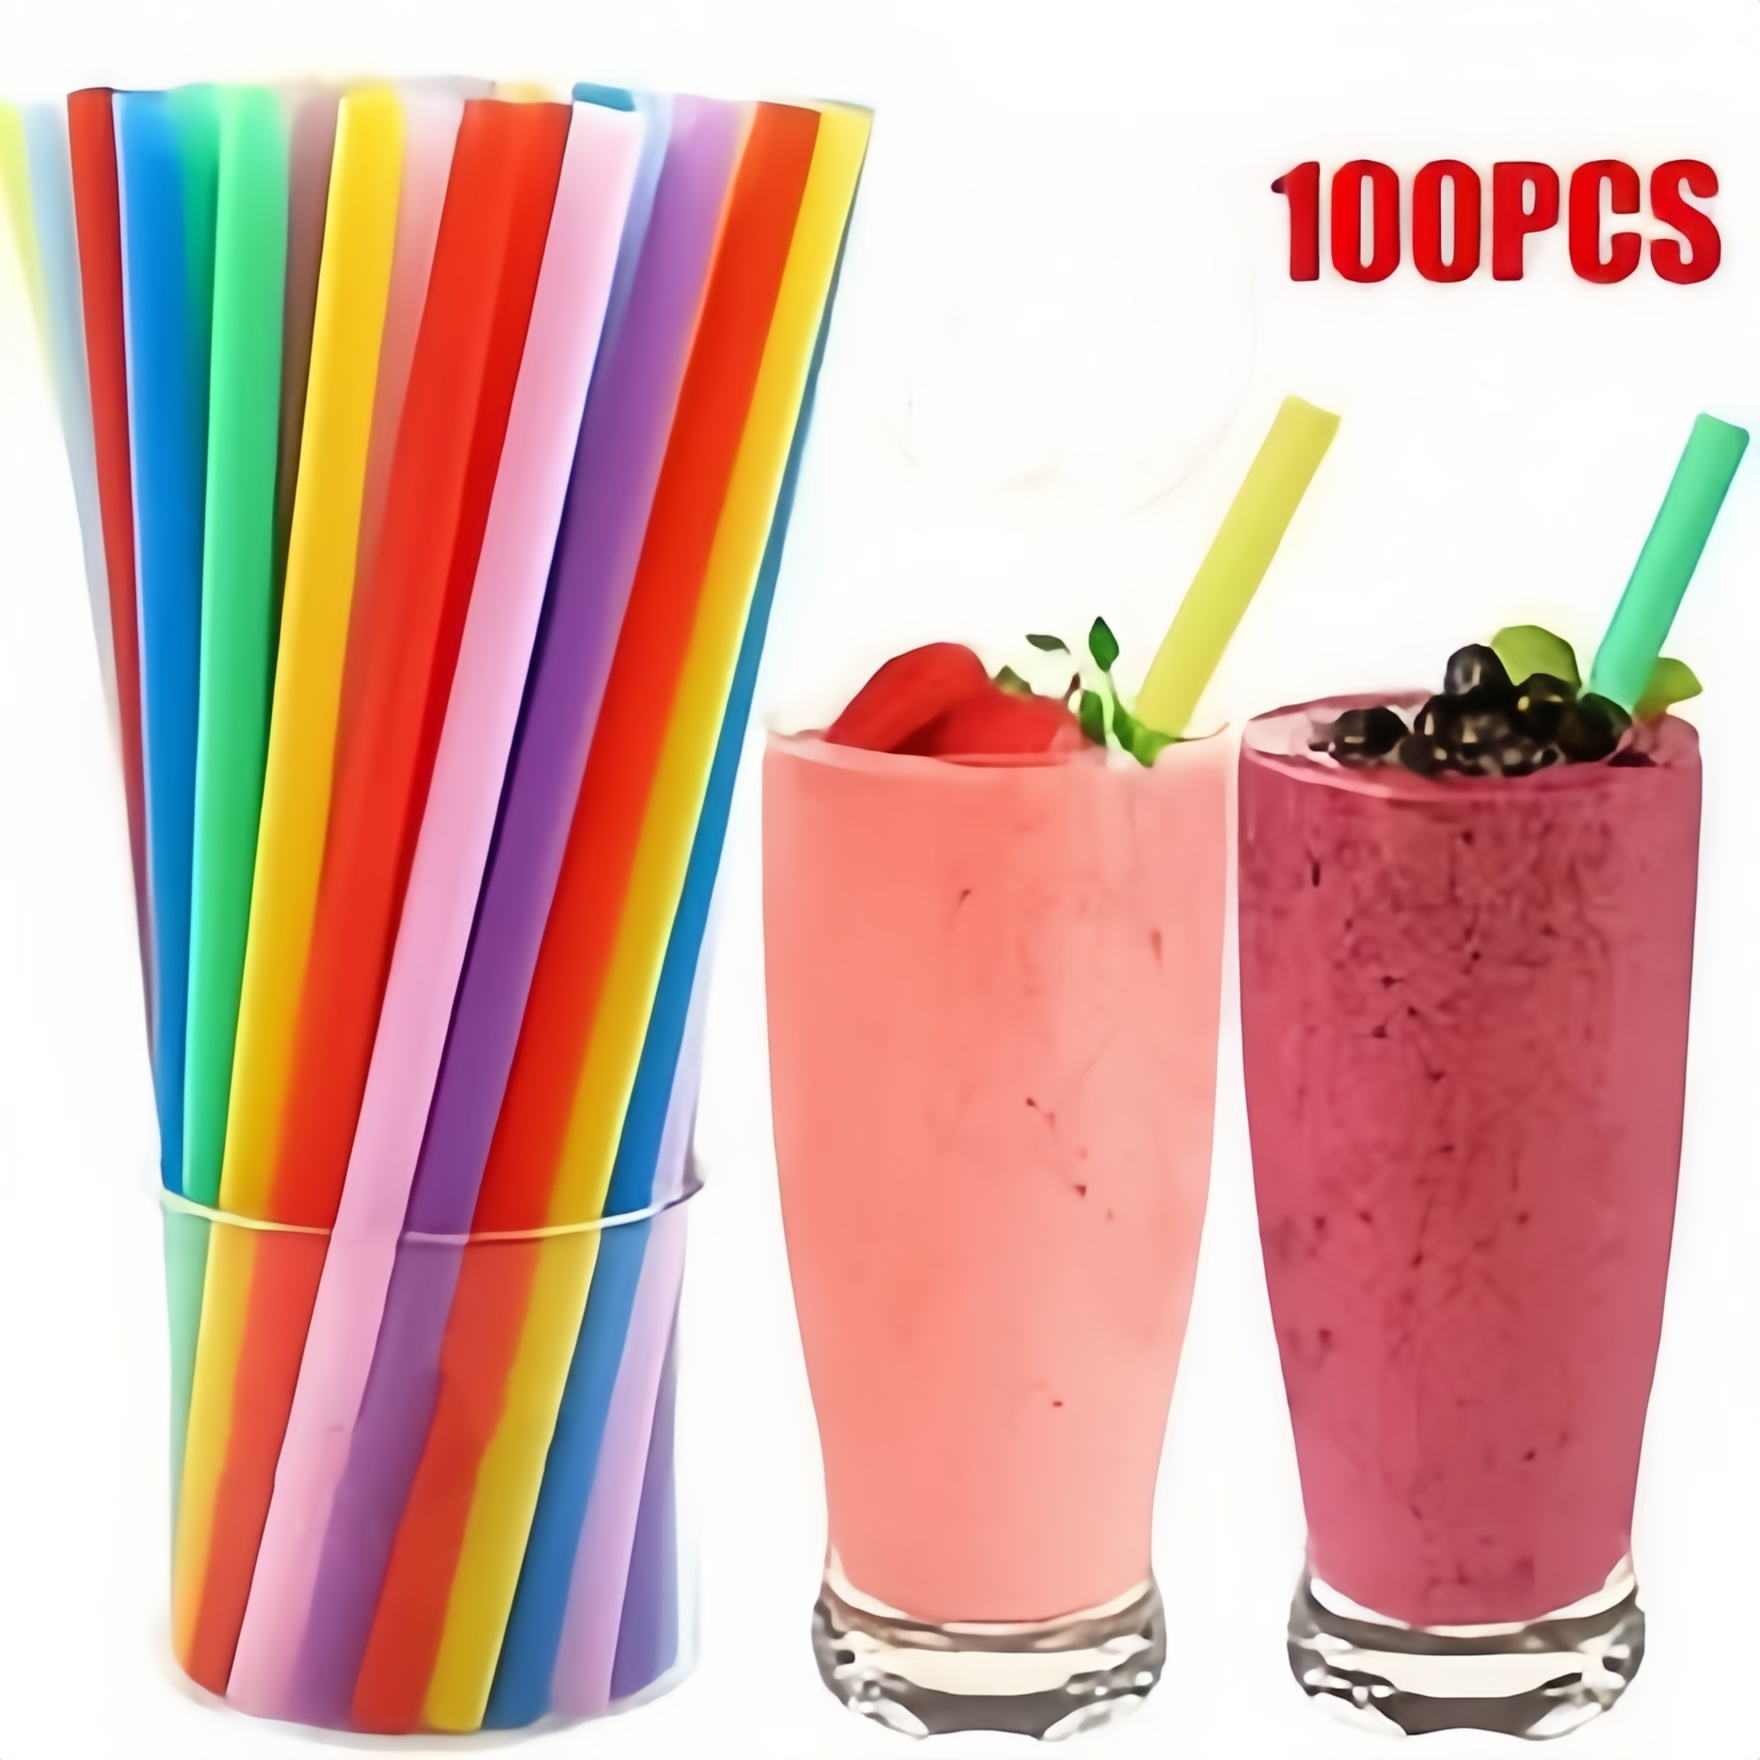 100 pcs Drinking Straw 10 Extra Long Plastic Boba for Party Smoothie  Milkshake, PACK - Fry's Food Stores